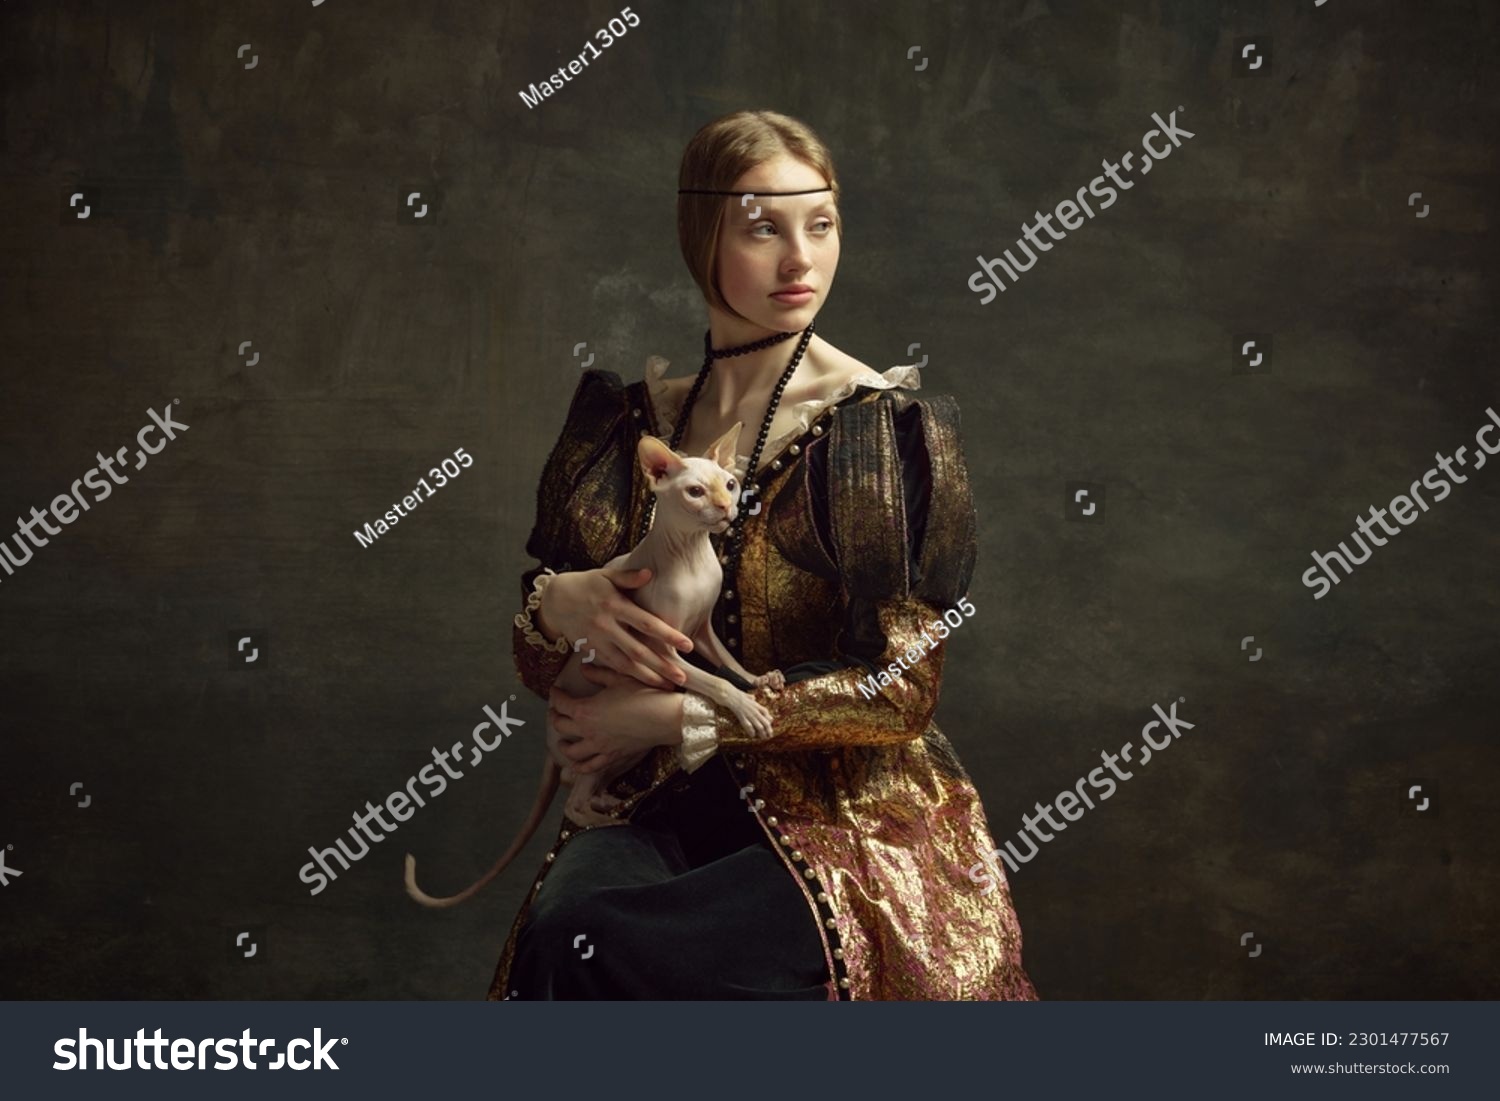 Portrait of pretty young girl in elegant retro clothing over dark vintage background posing with sphynx cat. Lady with ermine remake. Concept of history, renaissance art remake, comparison of eras #2301477567